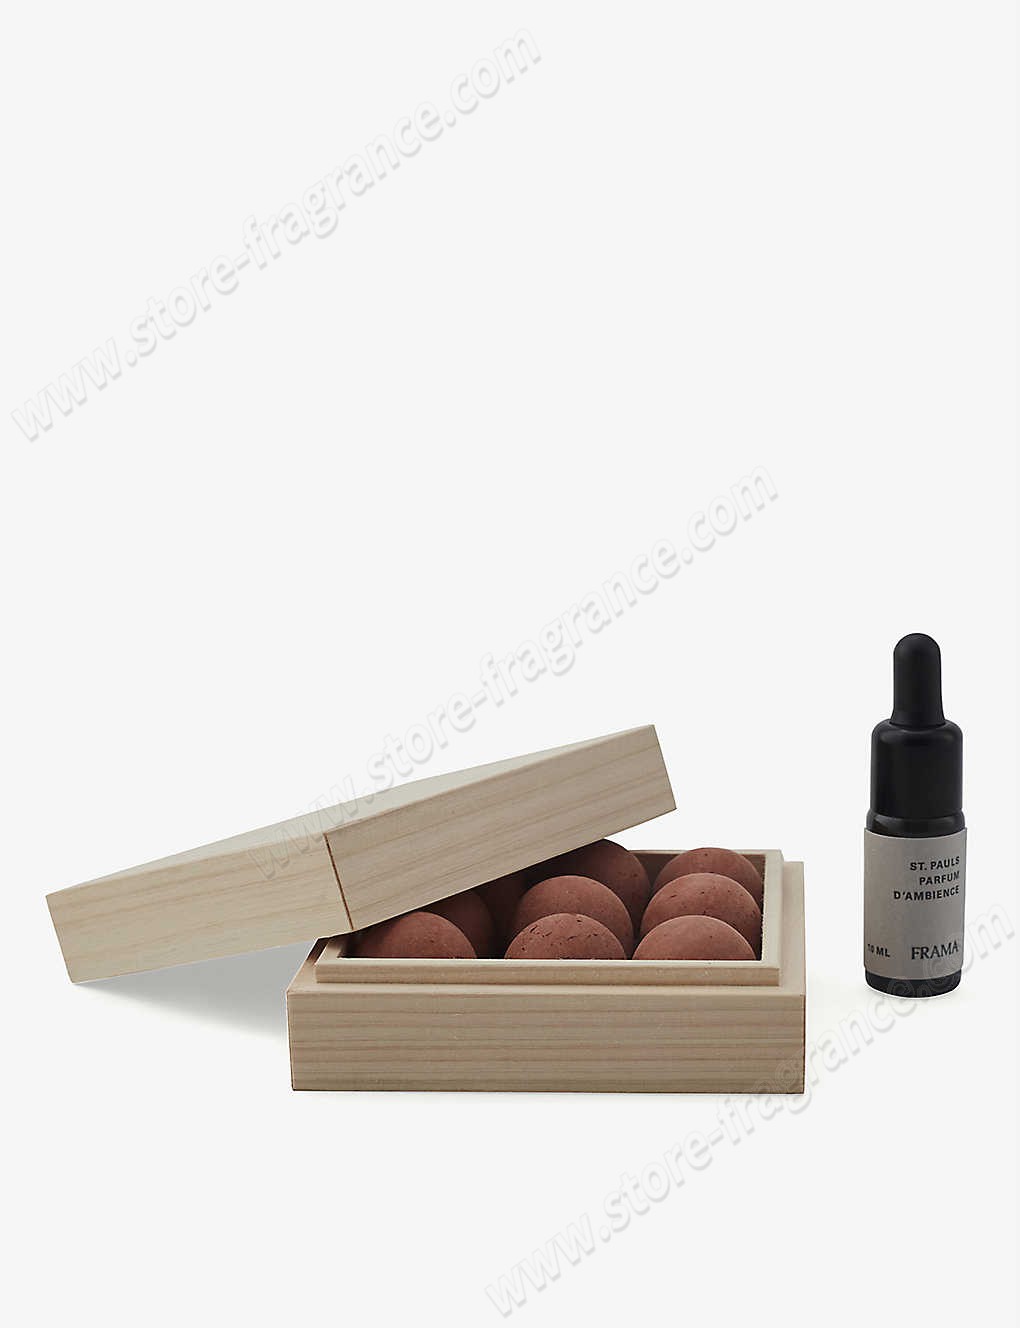 FRAMA/St. Pauls From Soil To Form natural room diffuser Limit Offer - FRAMA/St. Pauls From Soil To Form natural room diffuser Limit Offer